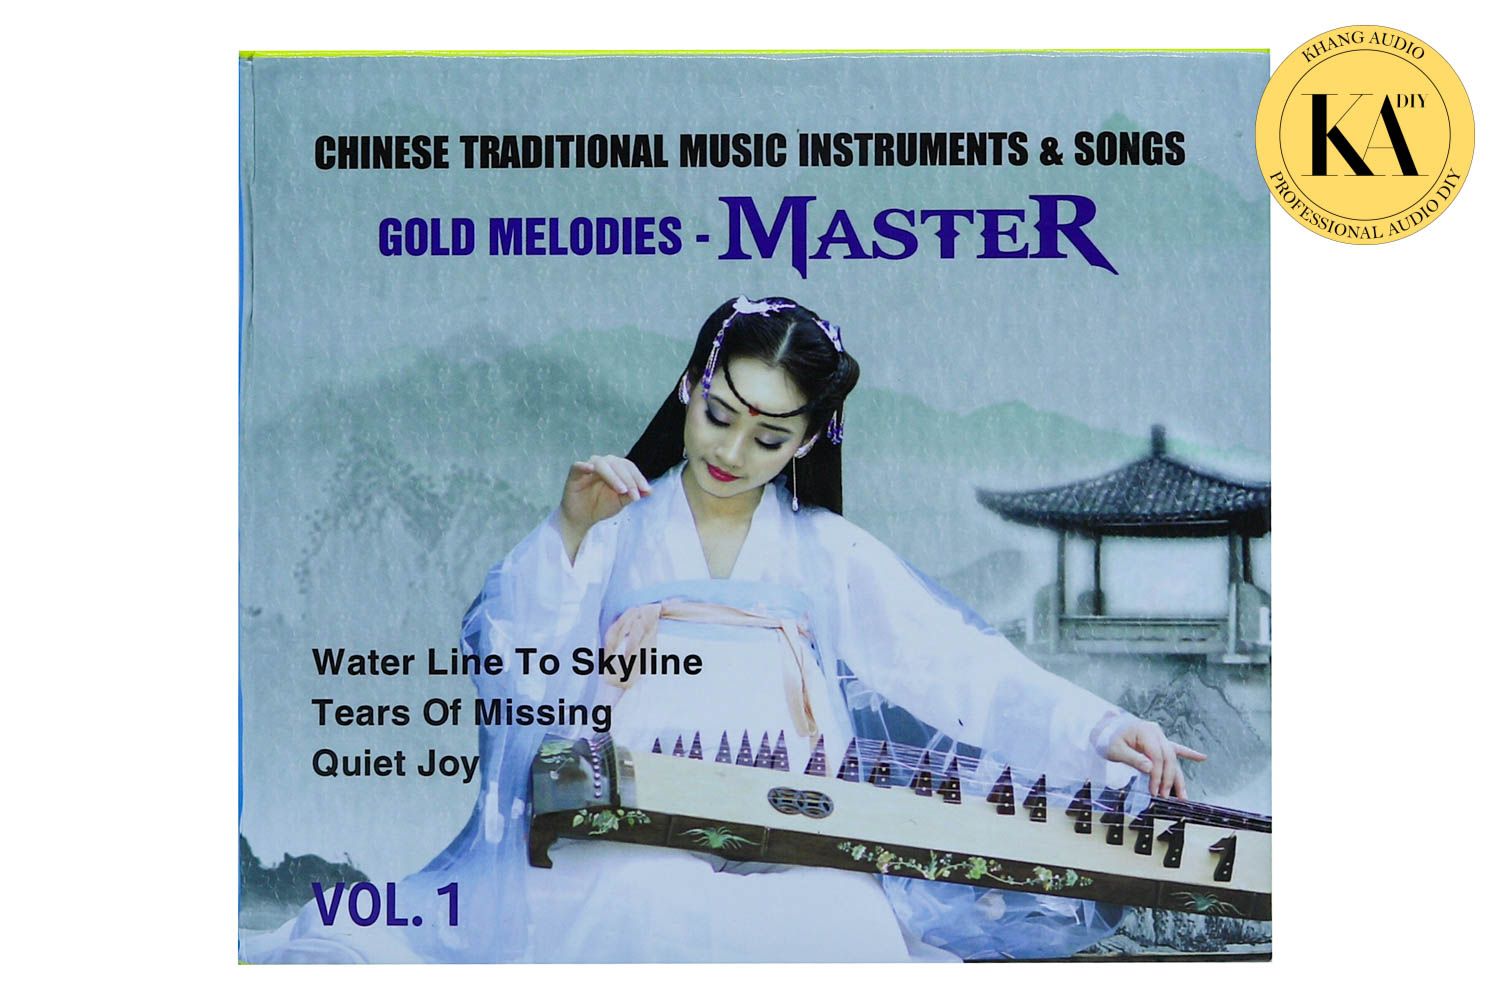 Gold Melodies - Master Vol.1